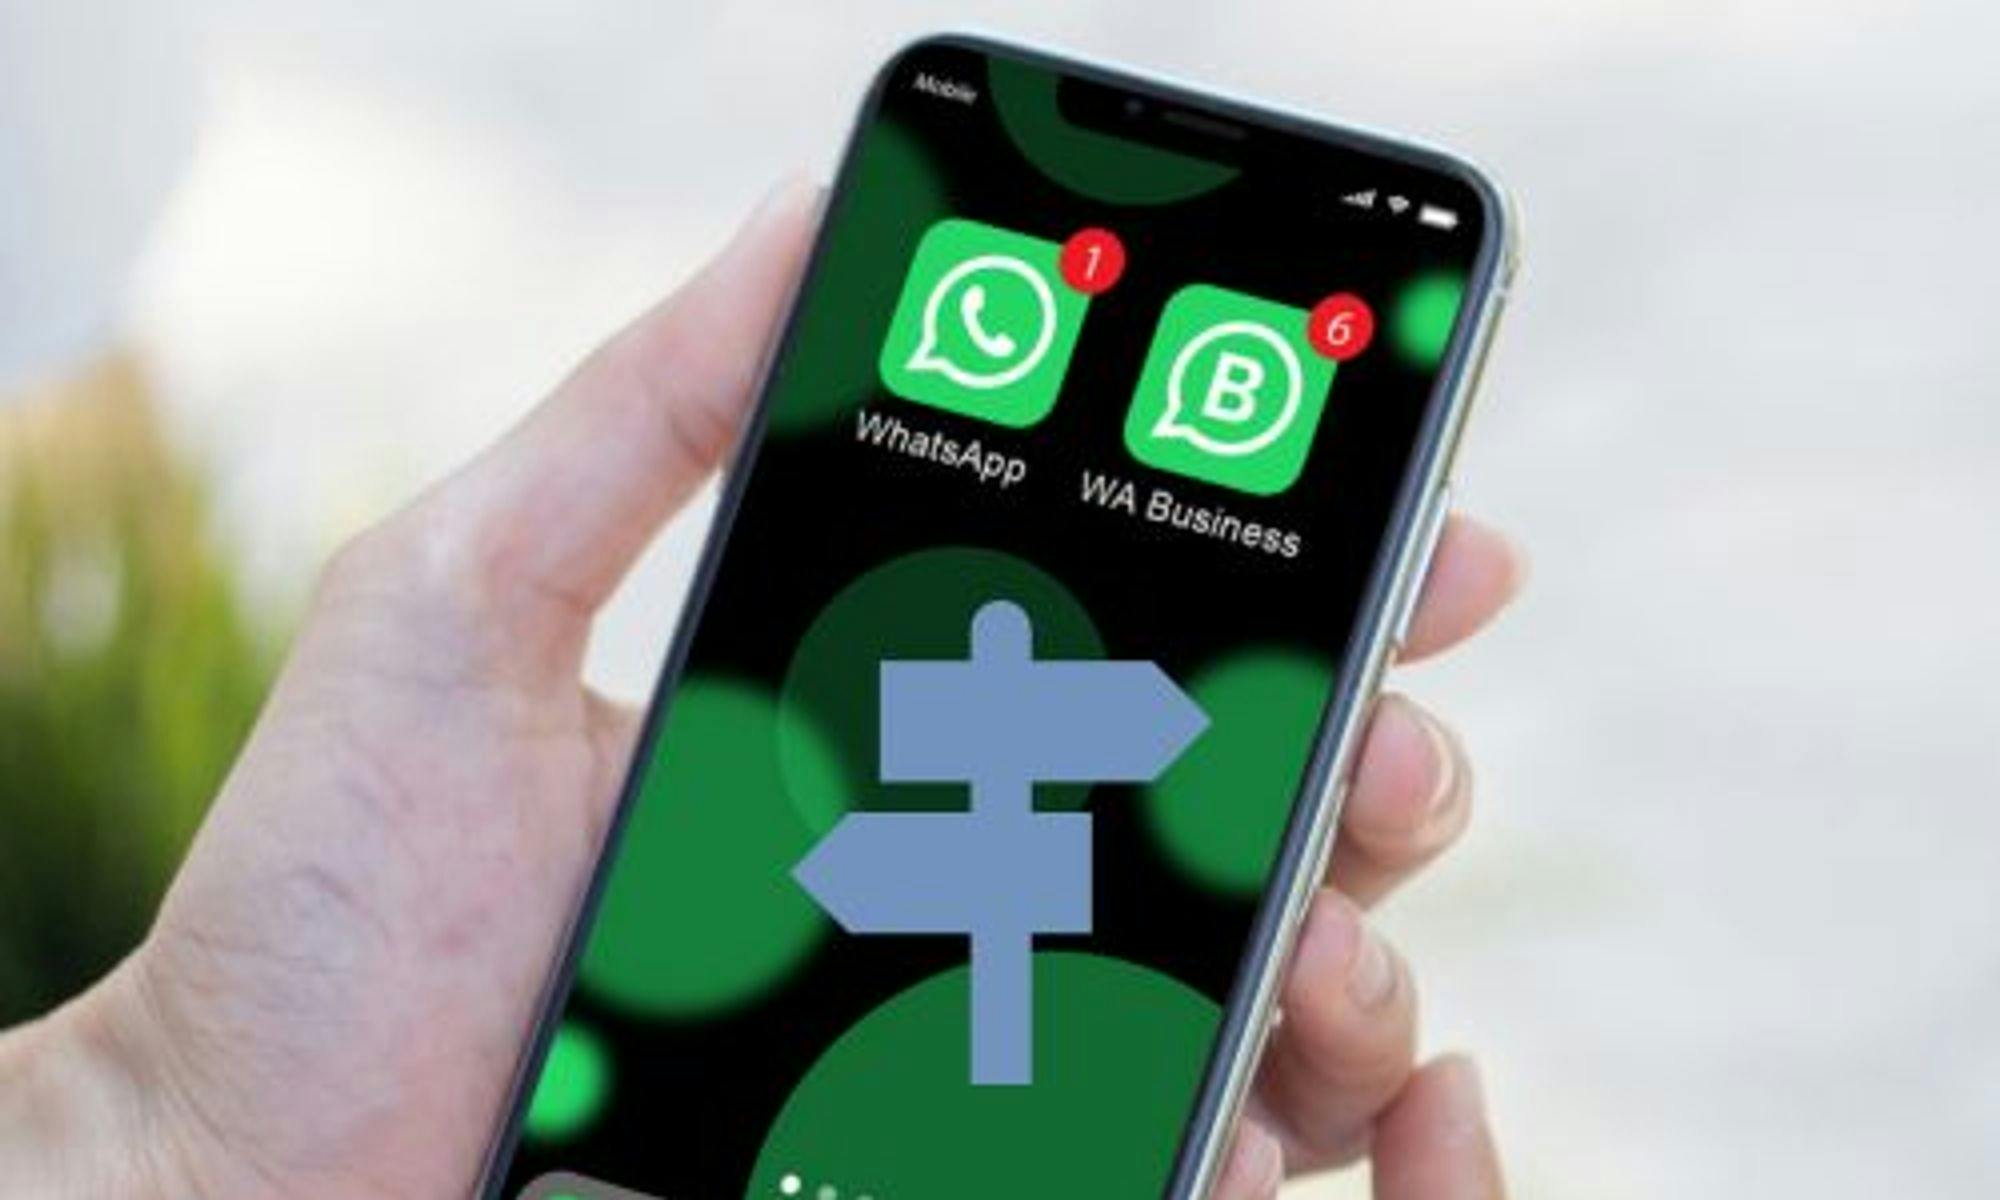 What Are The Differences Between WhatsApp And WhatsApp Business?